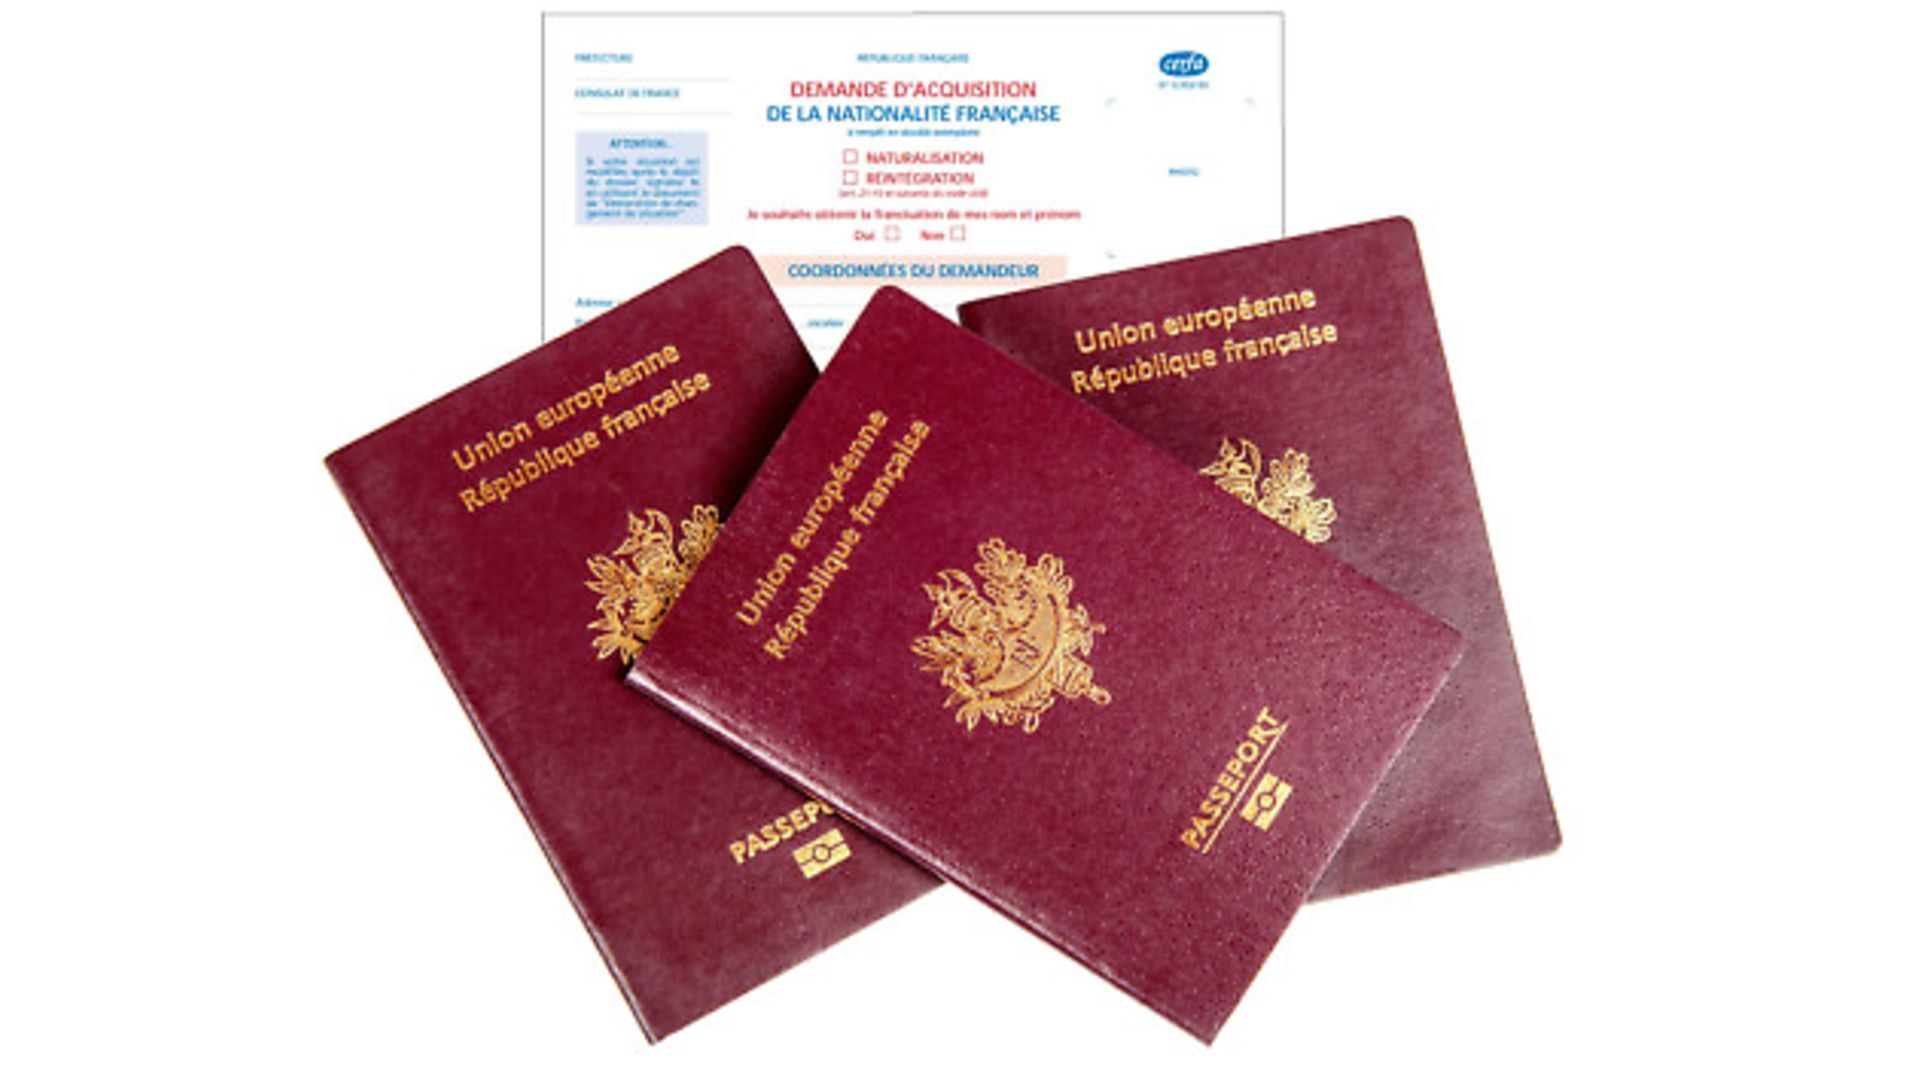 5. Different pathways for acquiring French citizenship